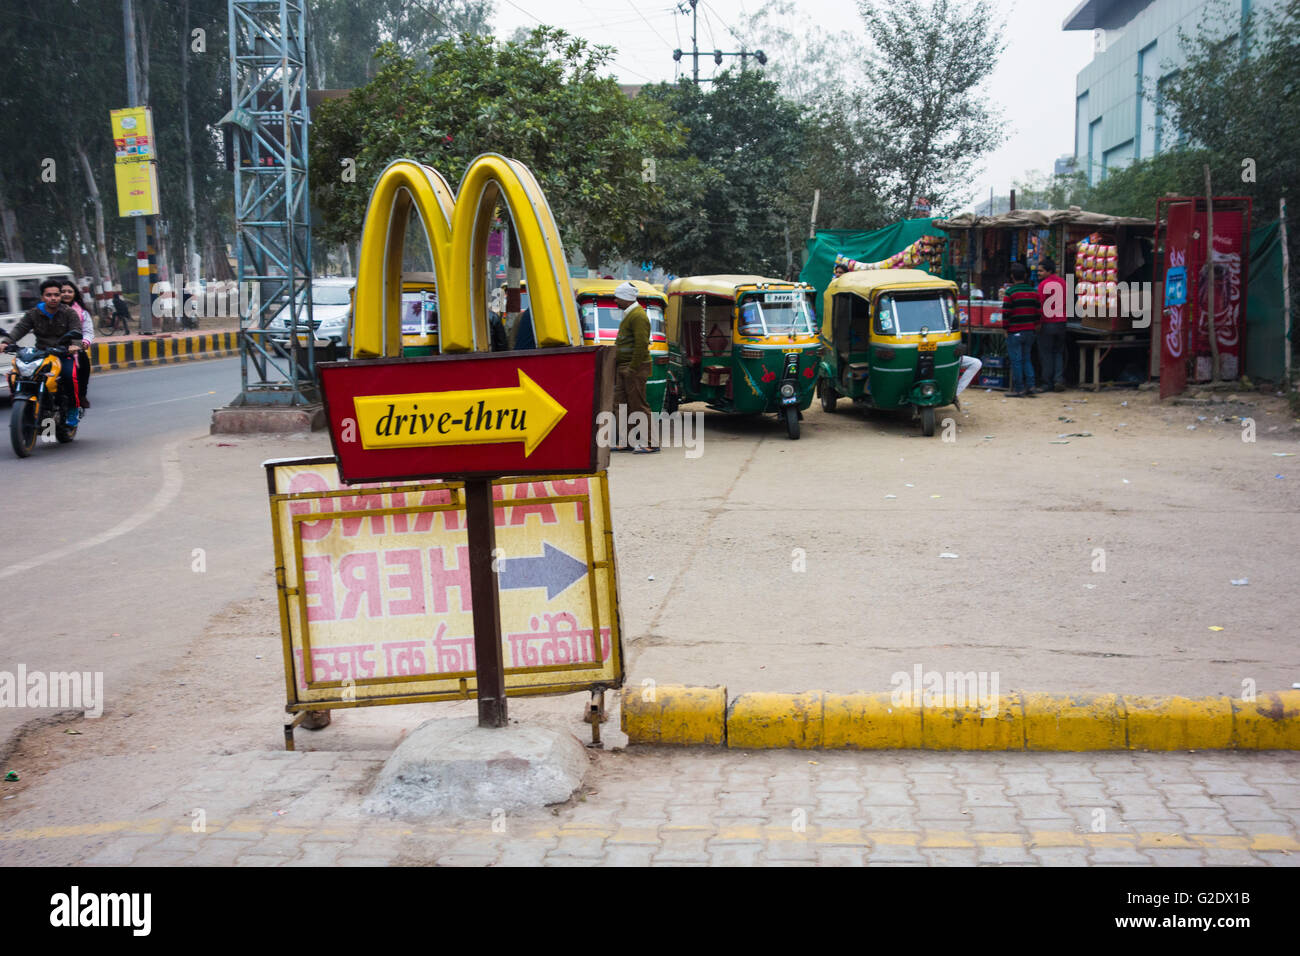 A McDonald's drive-thru sign in Agra, India Stock Photo